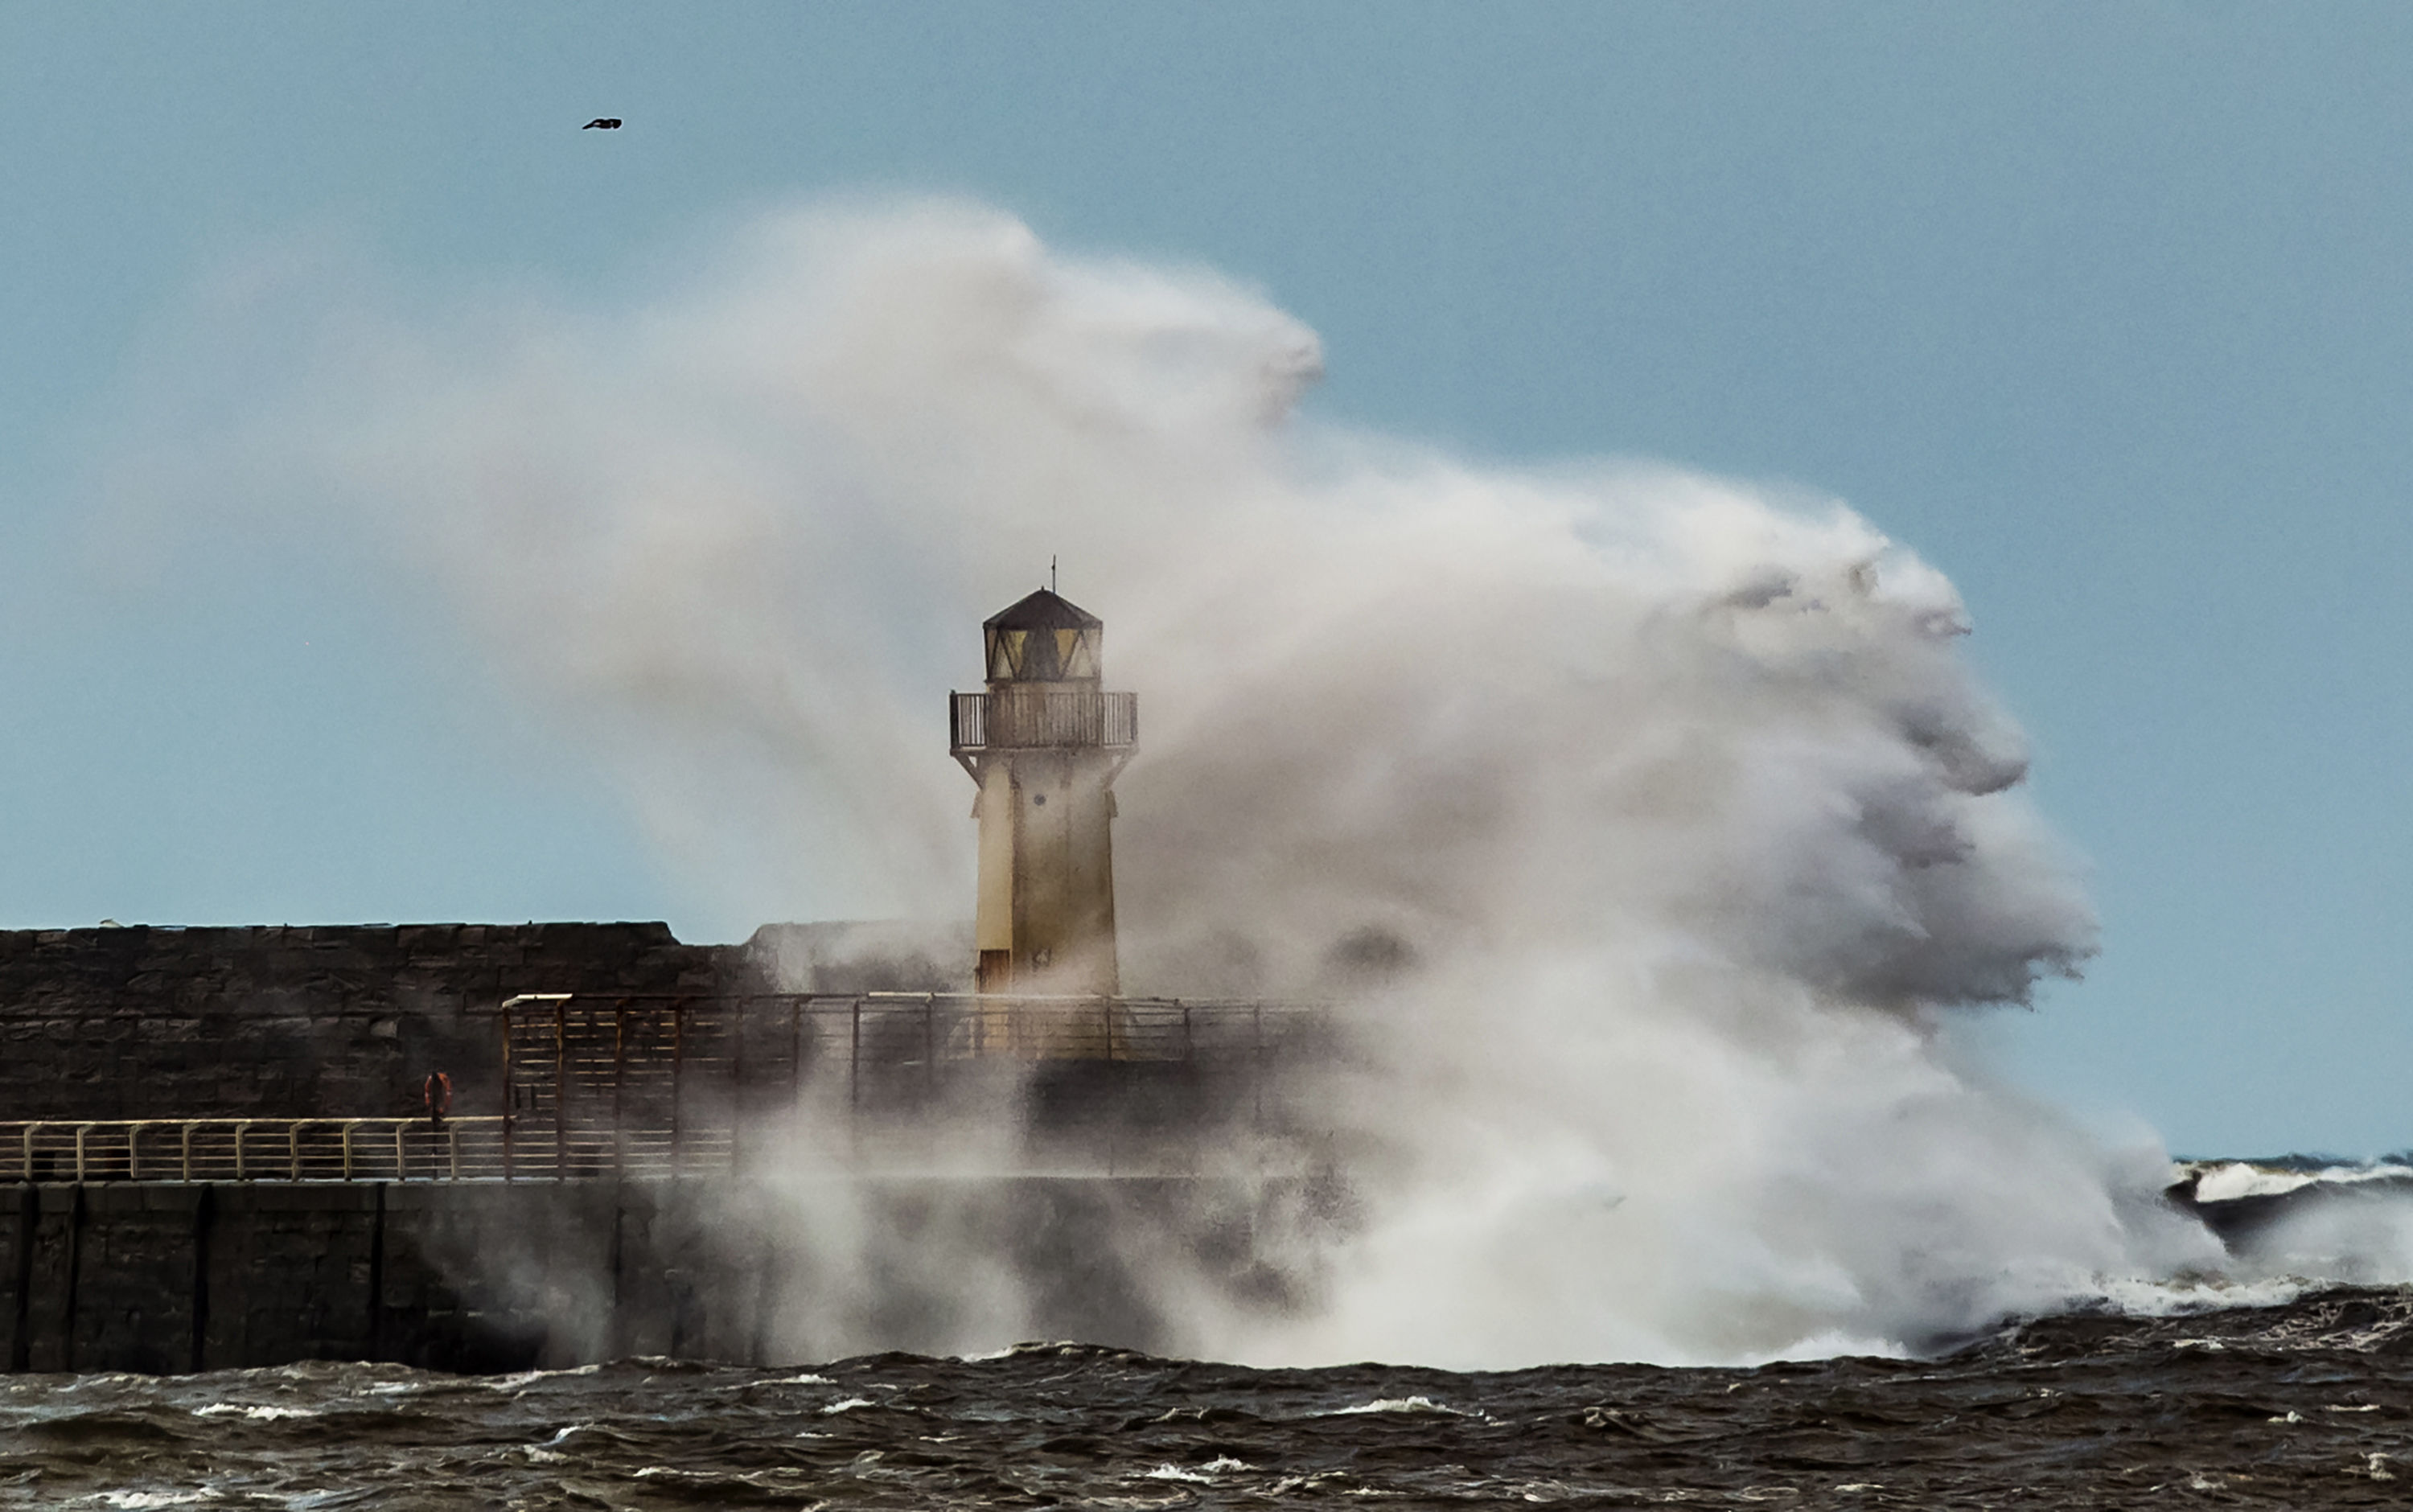 Waves breaking on the sea front, like this picture from Storm Gertrude, is a familiar sight.